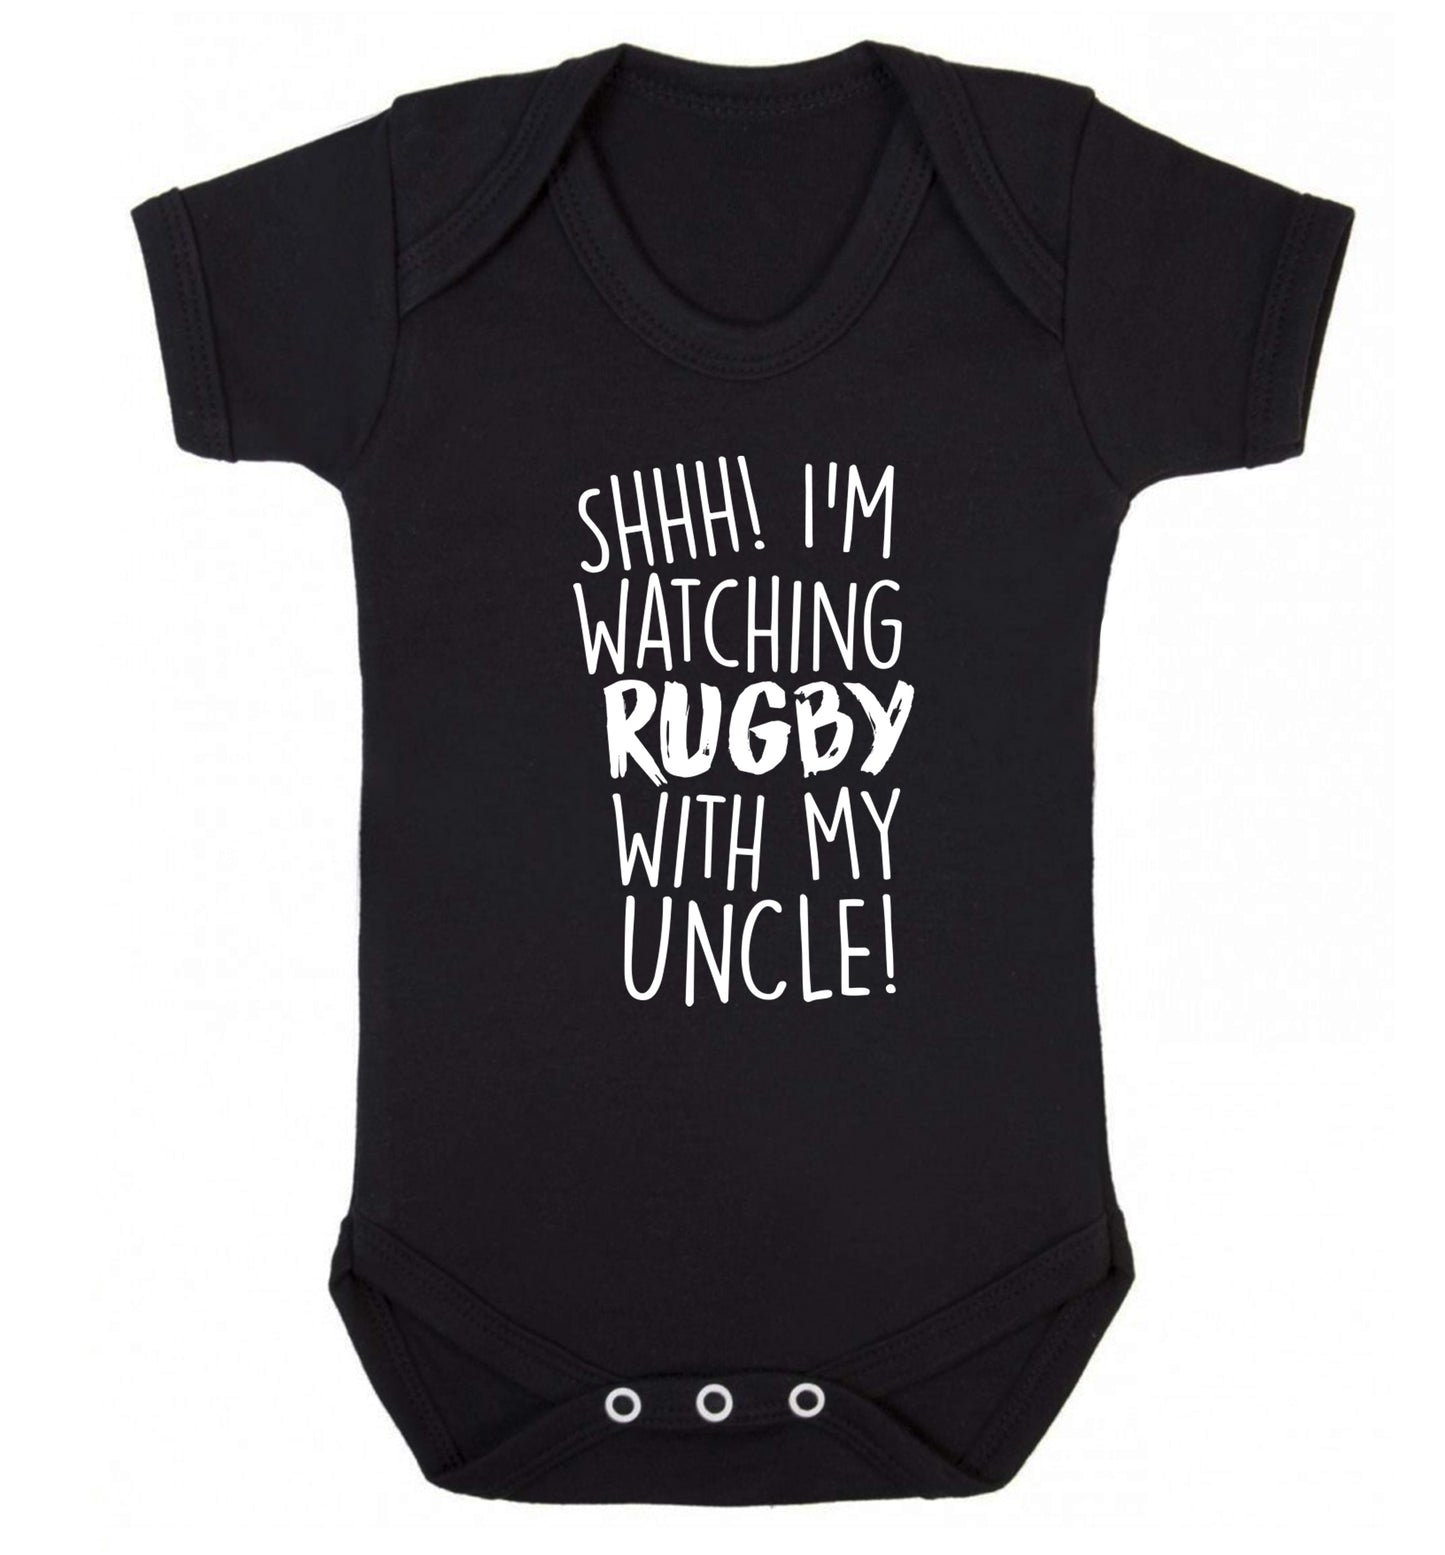 Shh.. I'm watching rugby with my uncle Baby Vest black 18-24 months